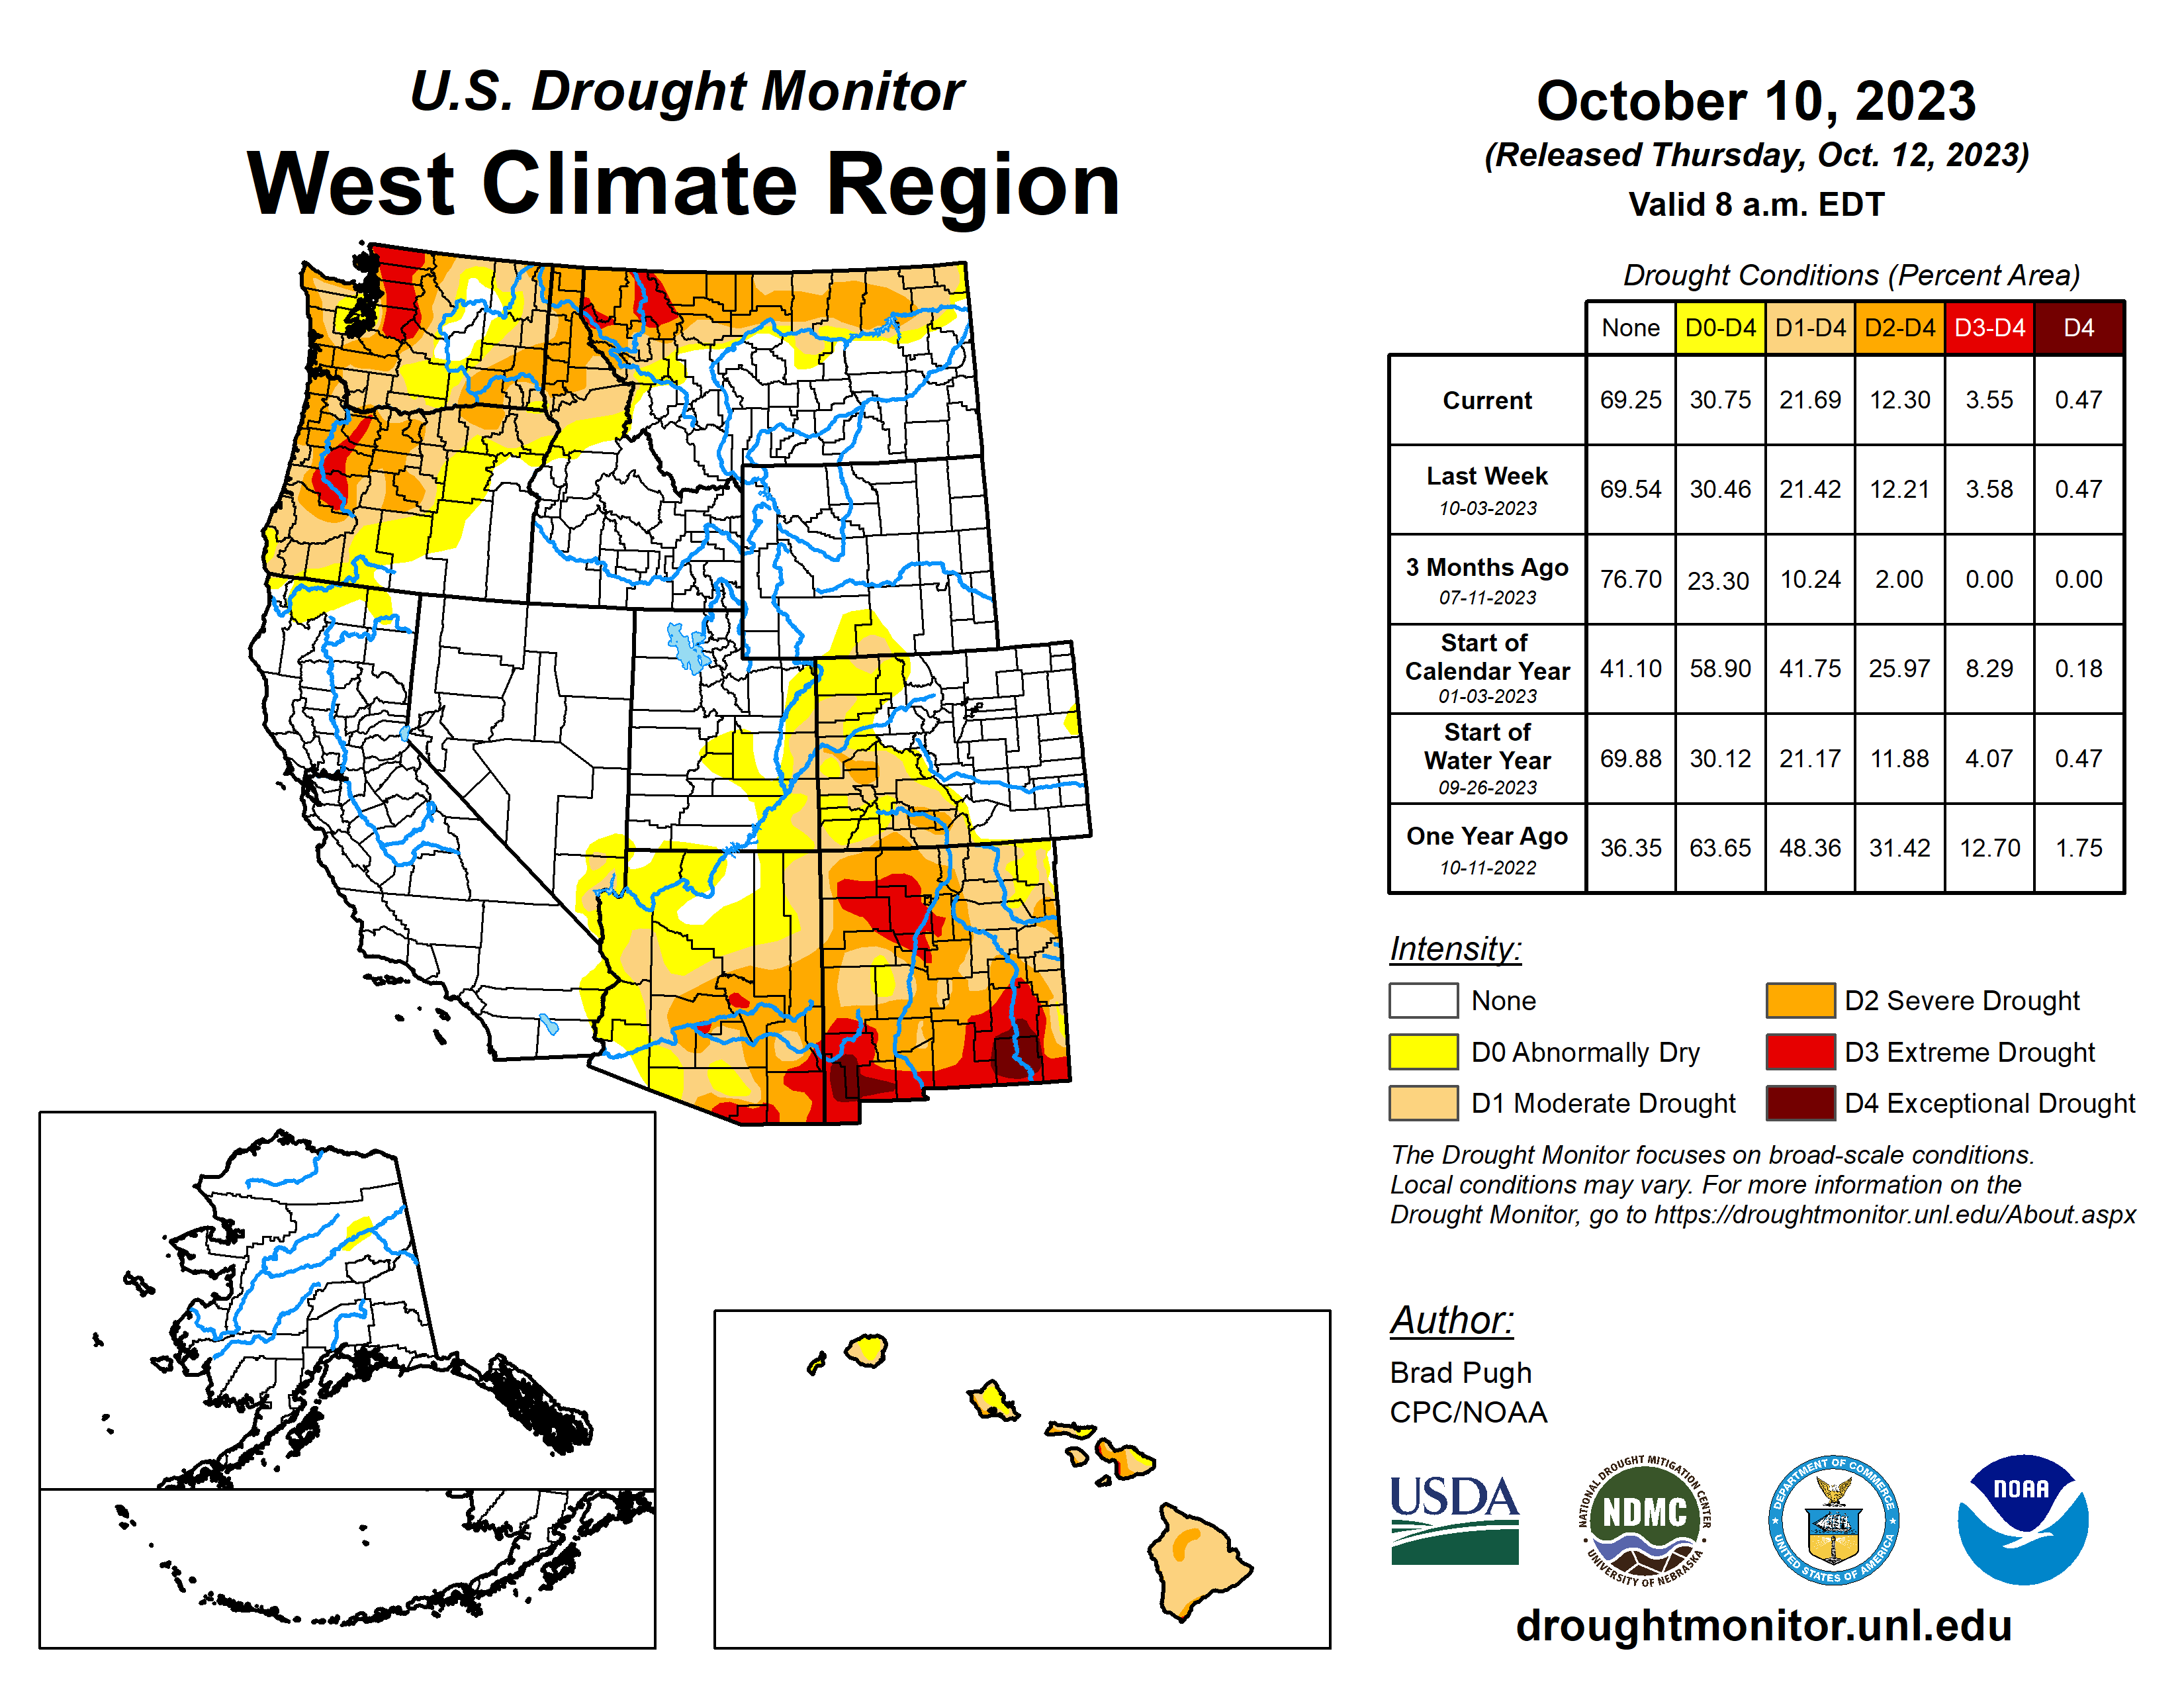 U.S. Drought Monitor map of the West Climate Region for 10 October 2023. The map shows areas in different drought categories along with a table of current and past drought conditions for the region.